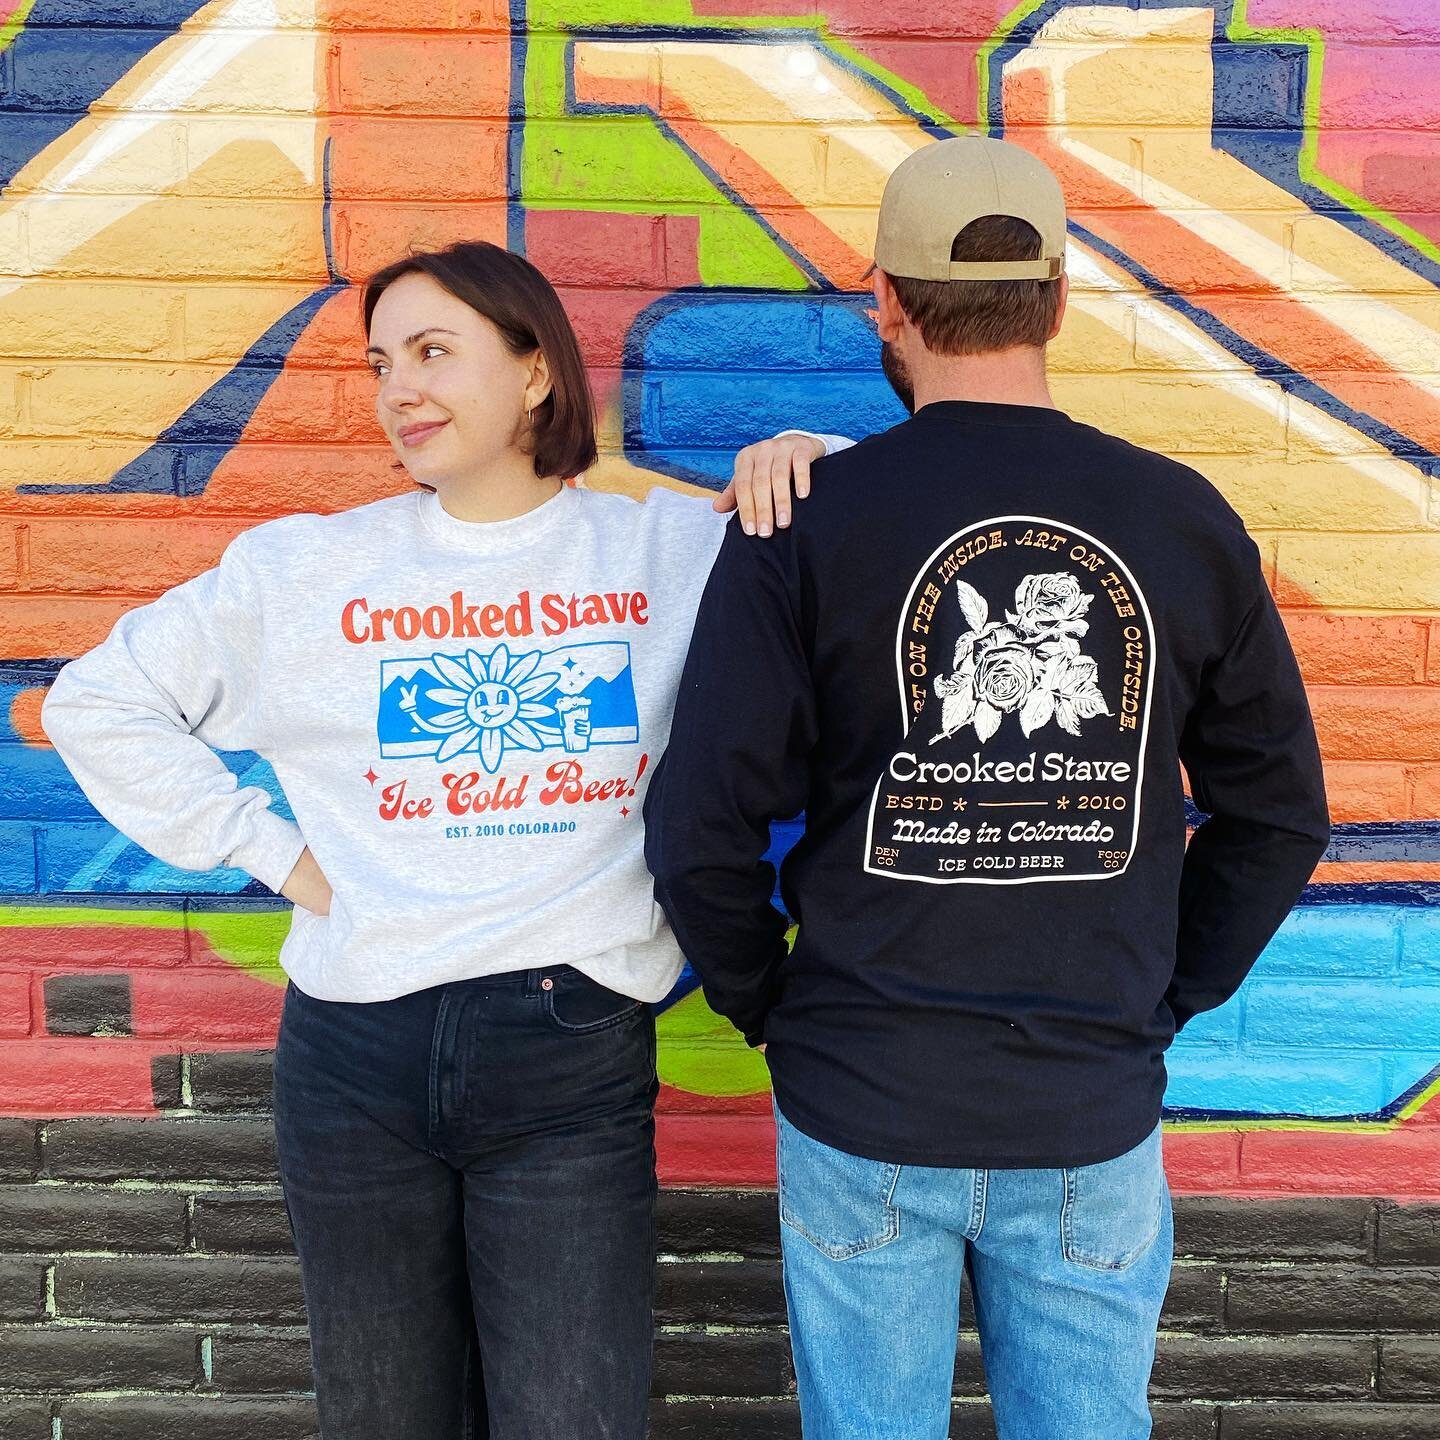 New merch just dropped! Available at our Denver taproom and FOCO taproom coming soon.